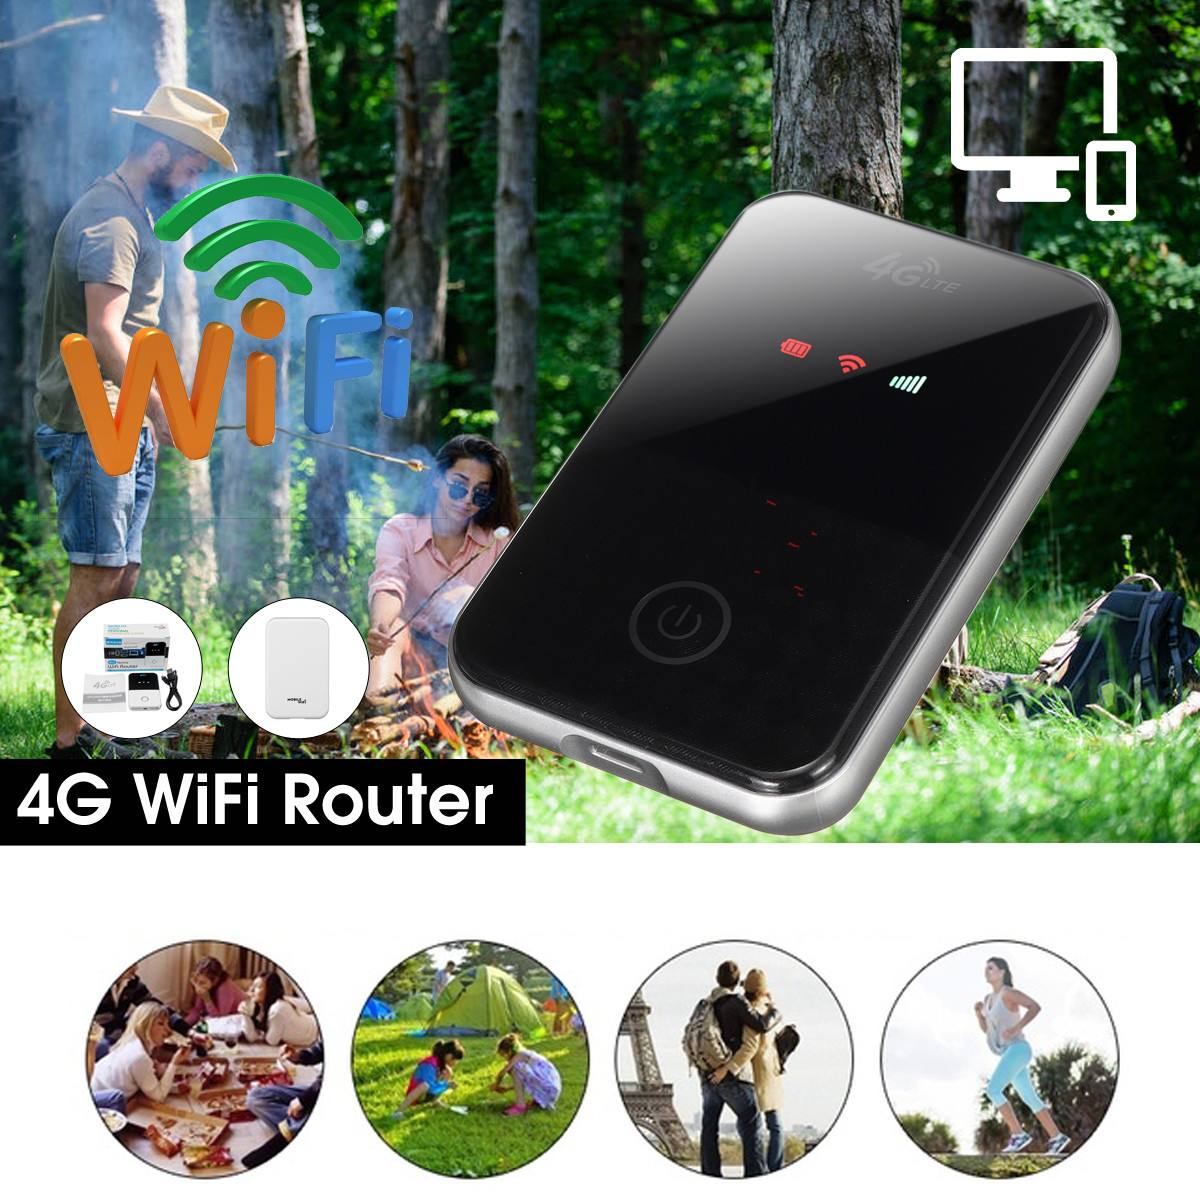 Tragbare 4G LTE Wifi Router kabellos Tasche Router Wifi FDD B1 B3 B7 B8 B20 WCDMA B1 B5 B8 Standard Sim Karte 150mbps